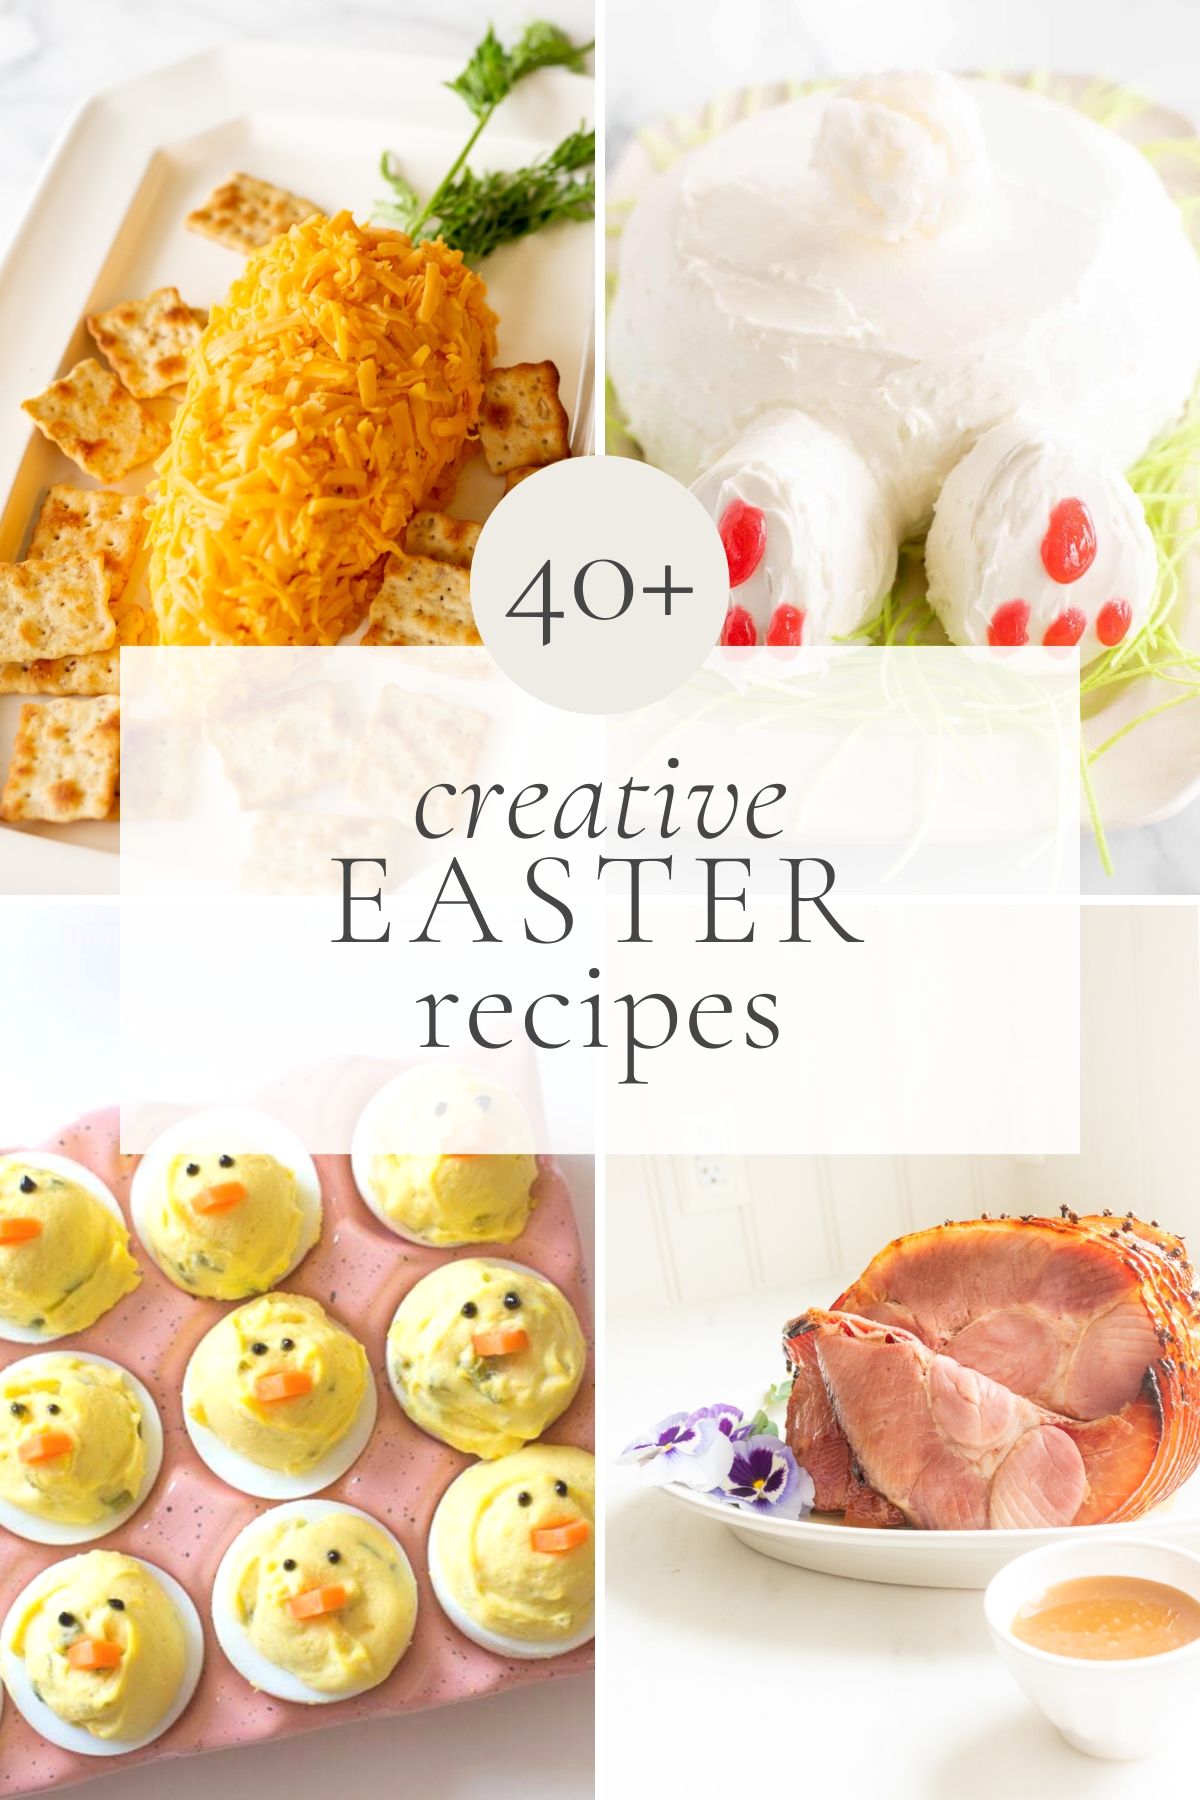 Explore 40 imaginative Easter recipes full of delectable flavors and delightful presentations.